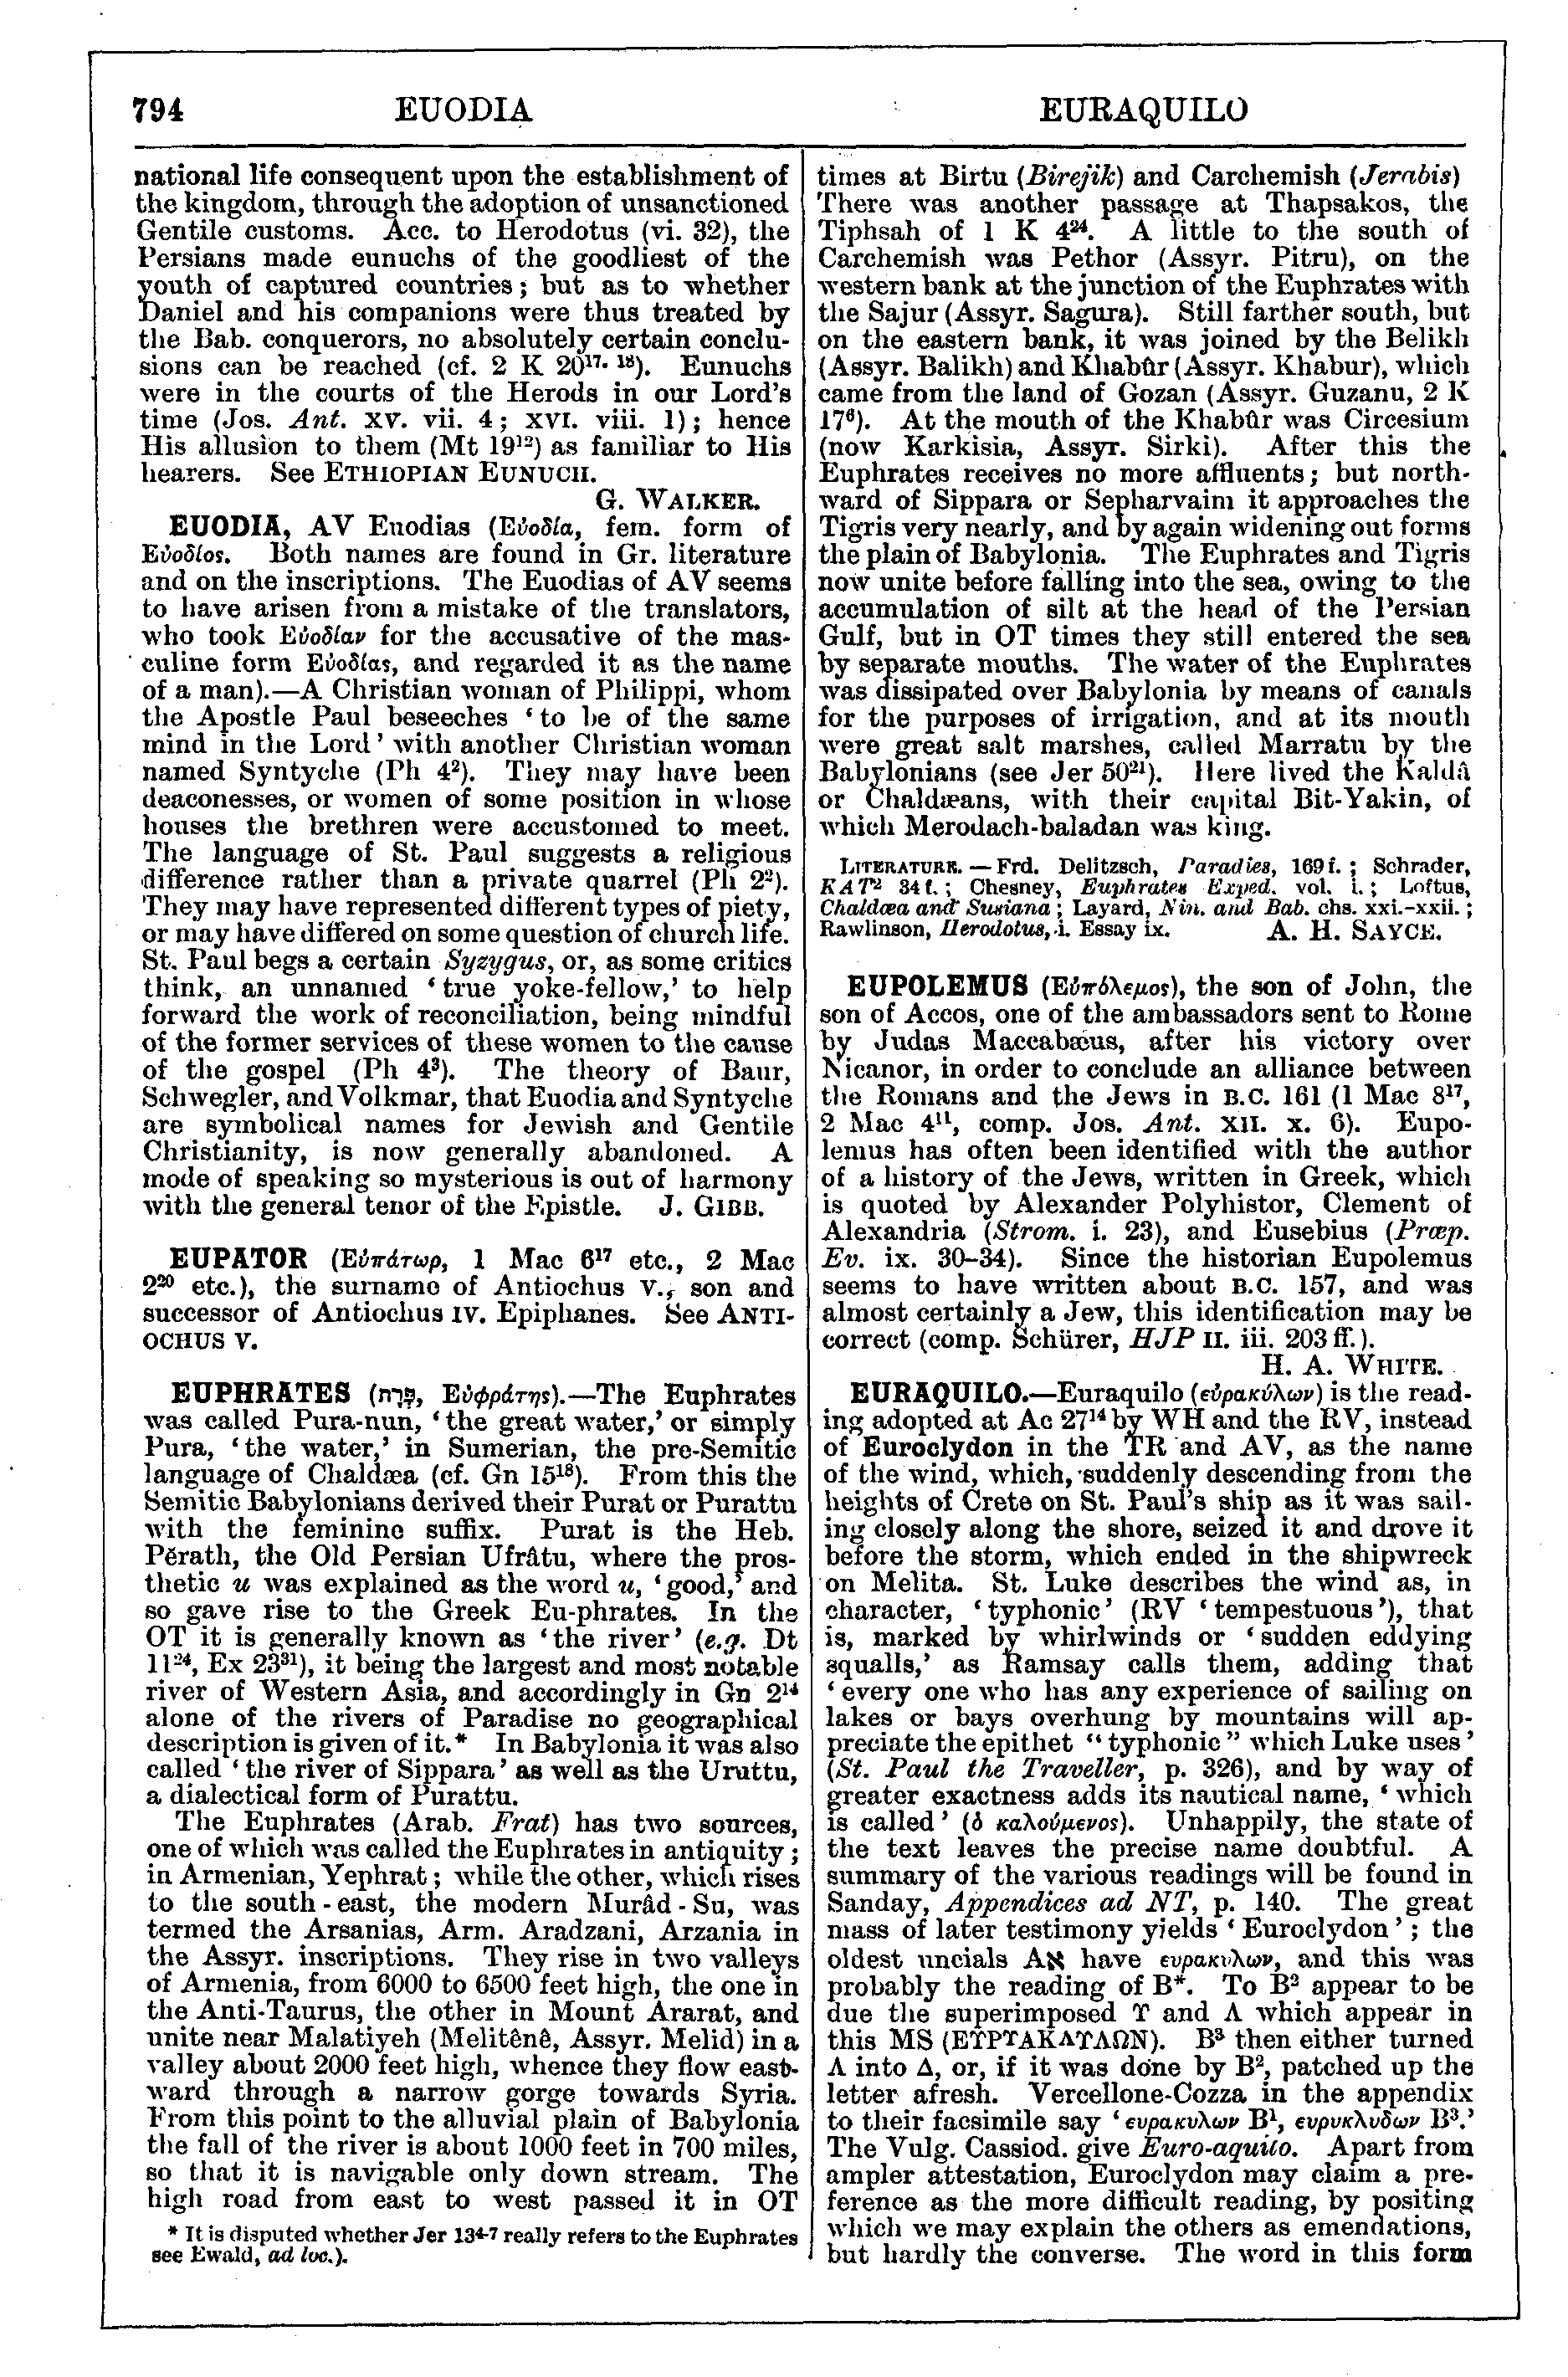 Image of page 794